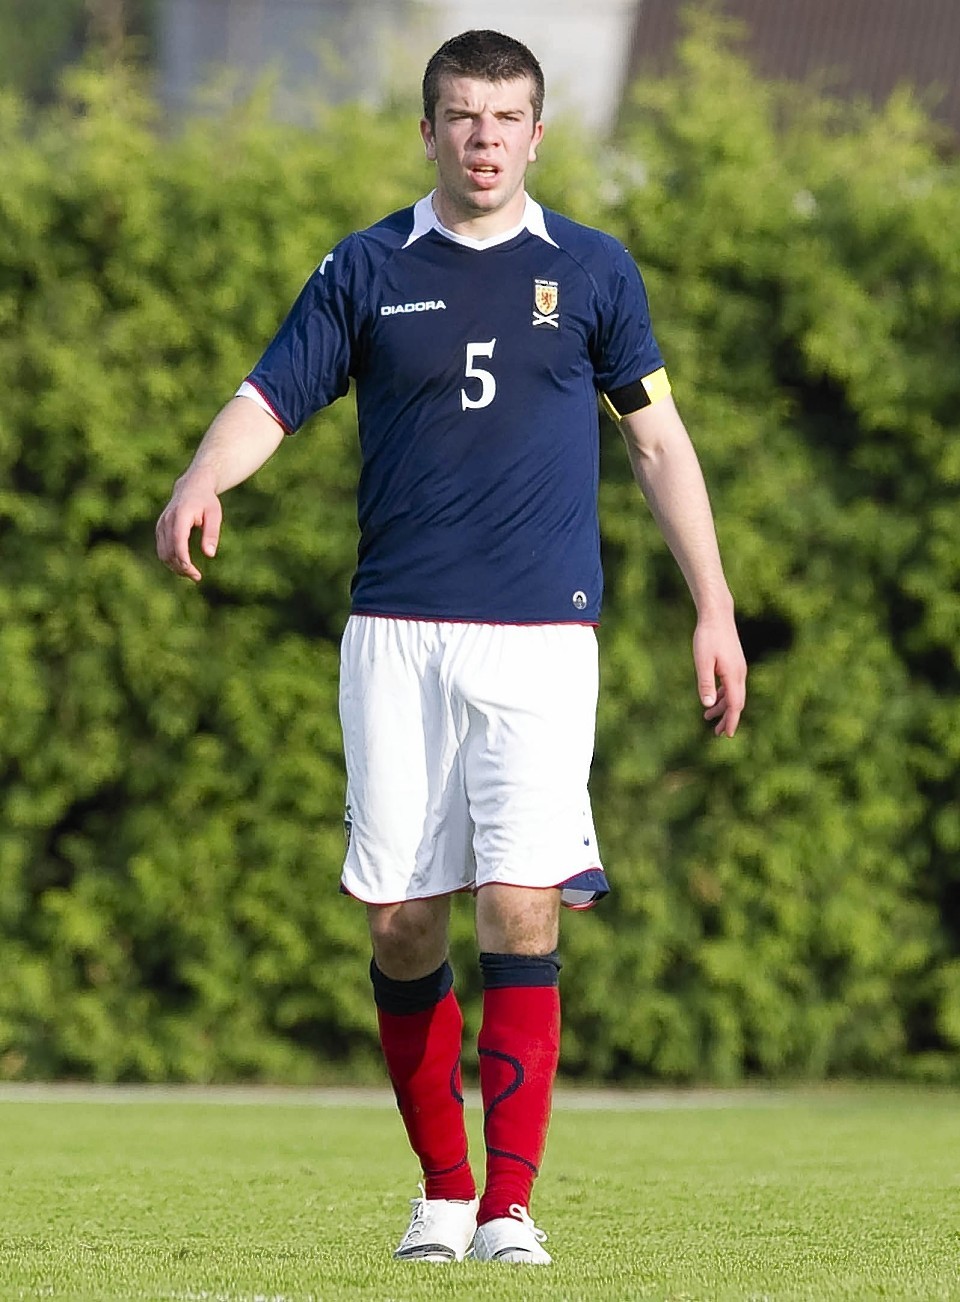 Grant Hanley is still a young lad but here he is playing for Scotland at under-19 level in 2010 in a match against Belgium